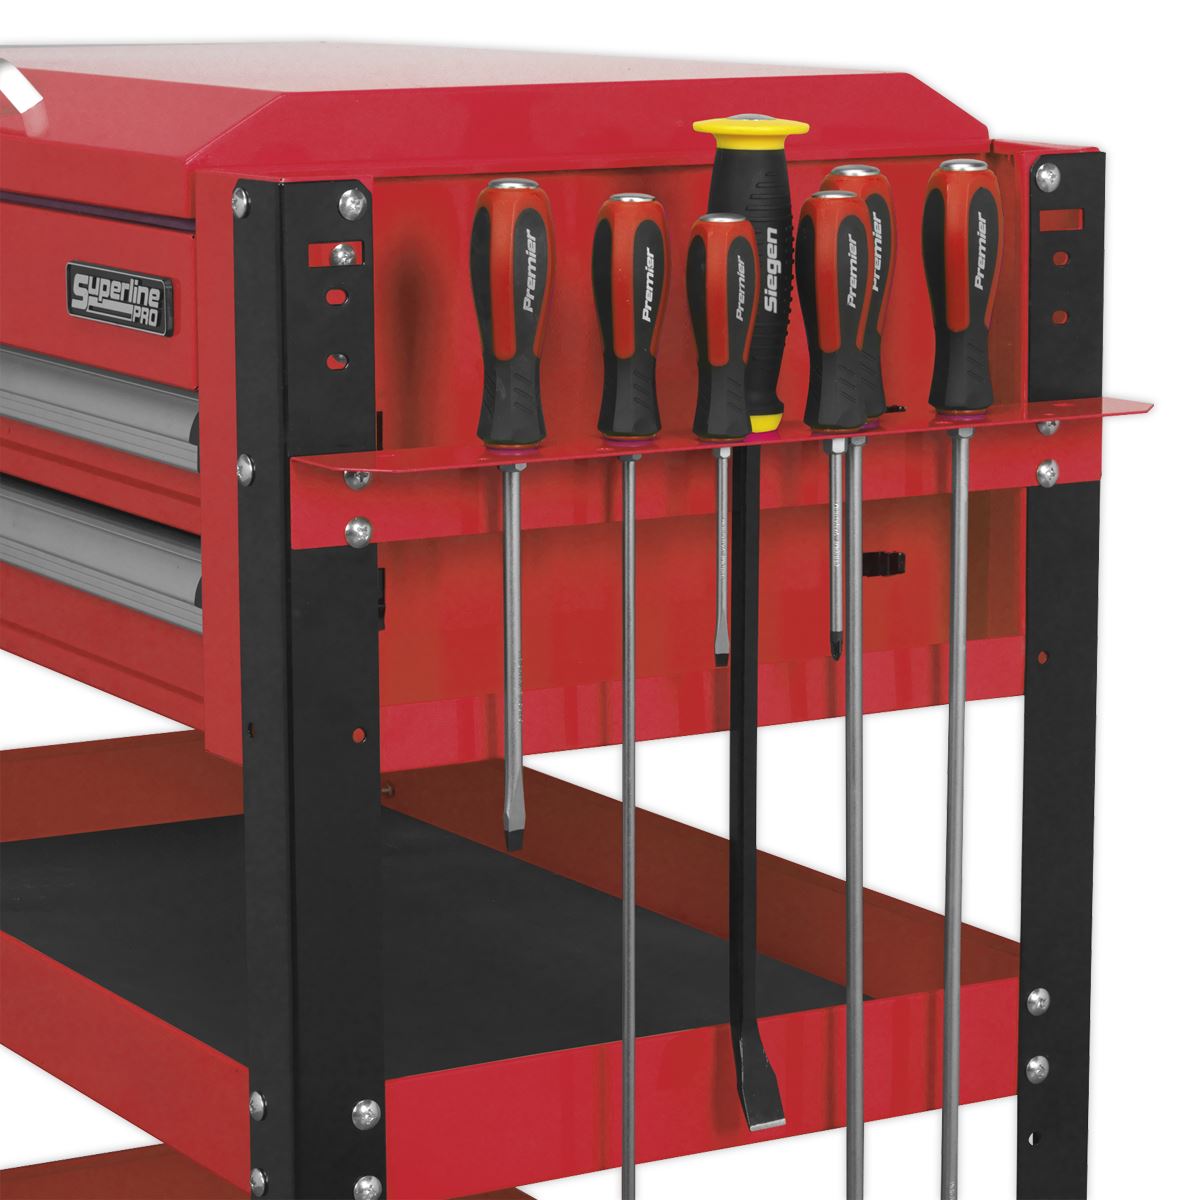 Sealey Superline Pro Heavy-Duty Mobile Tool & Parts Trolley 2 Drawers & Lockable Top - Red